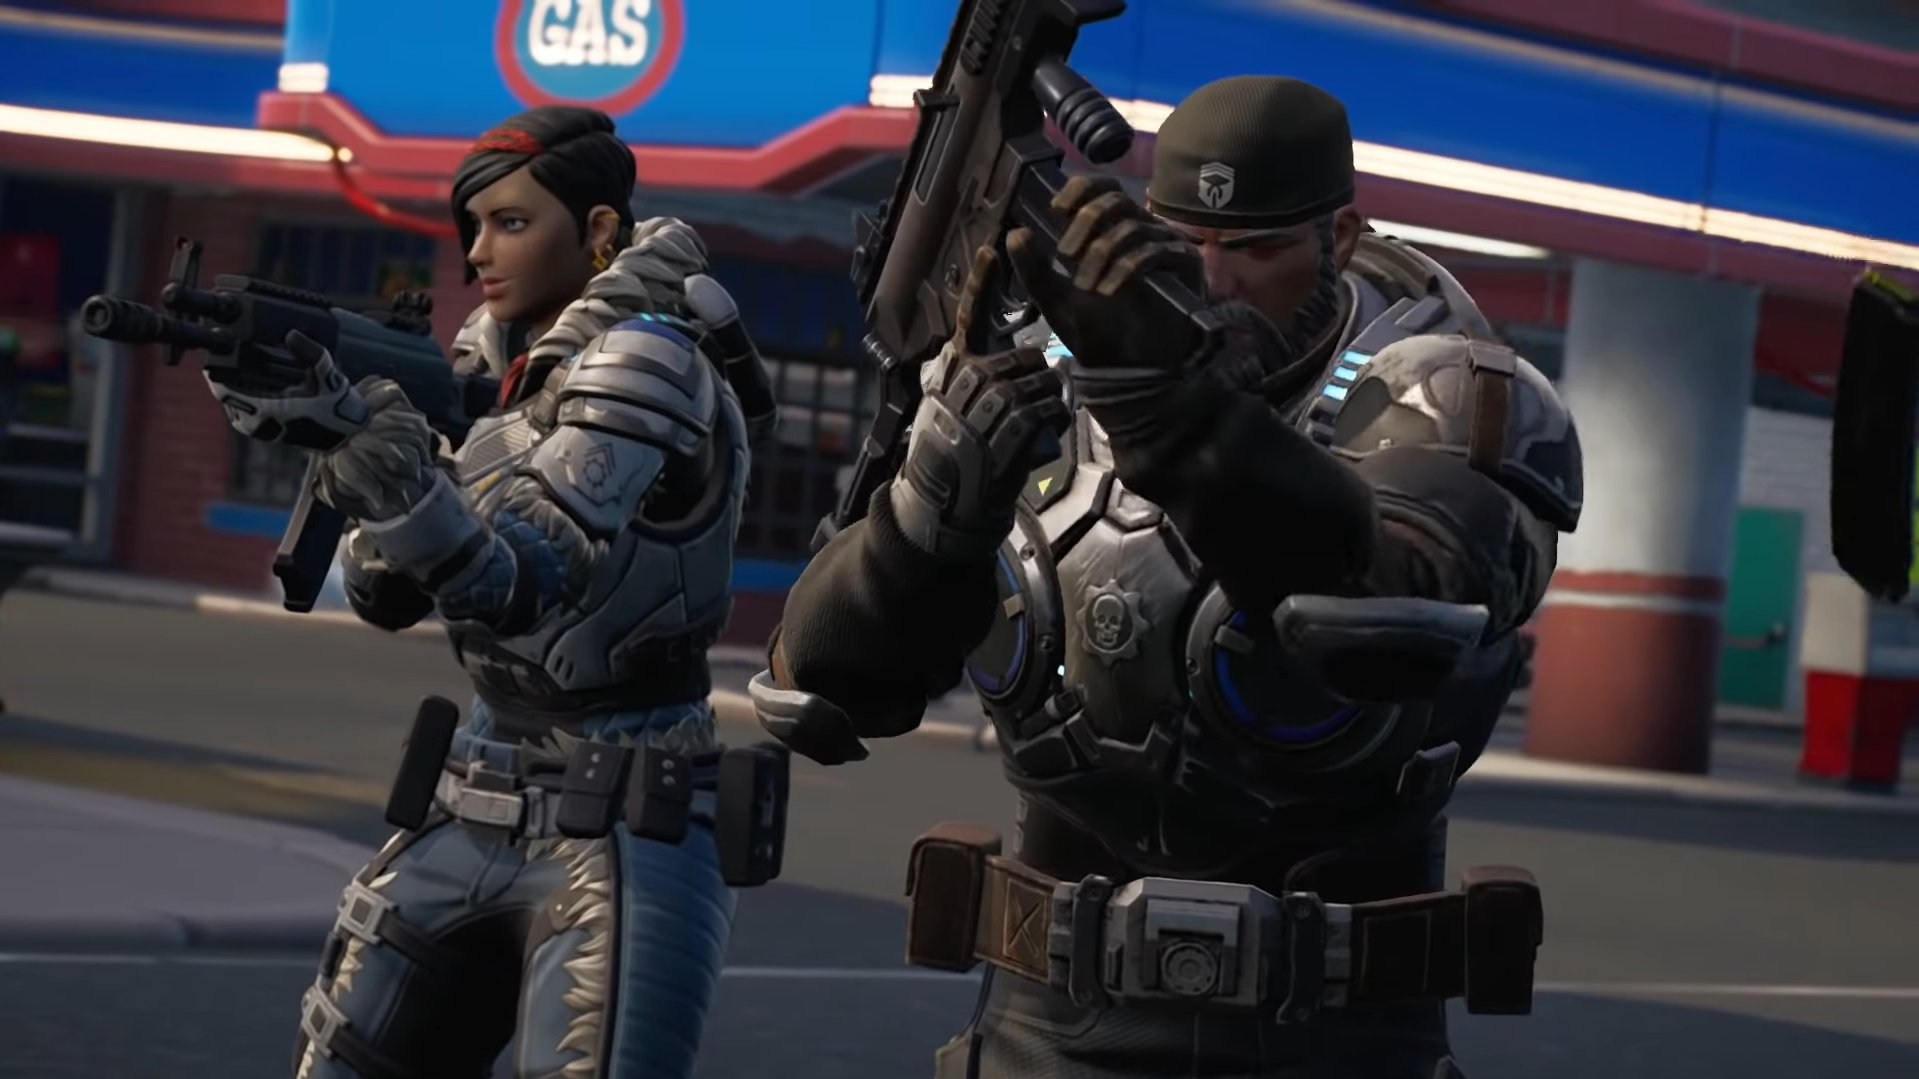 Fortnite Chapter 3 Battlepass leaked: includes Gears of War characters  Marcus Fenix & Kait Diaz - Gaming - XboxEra